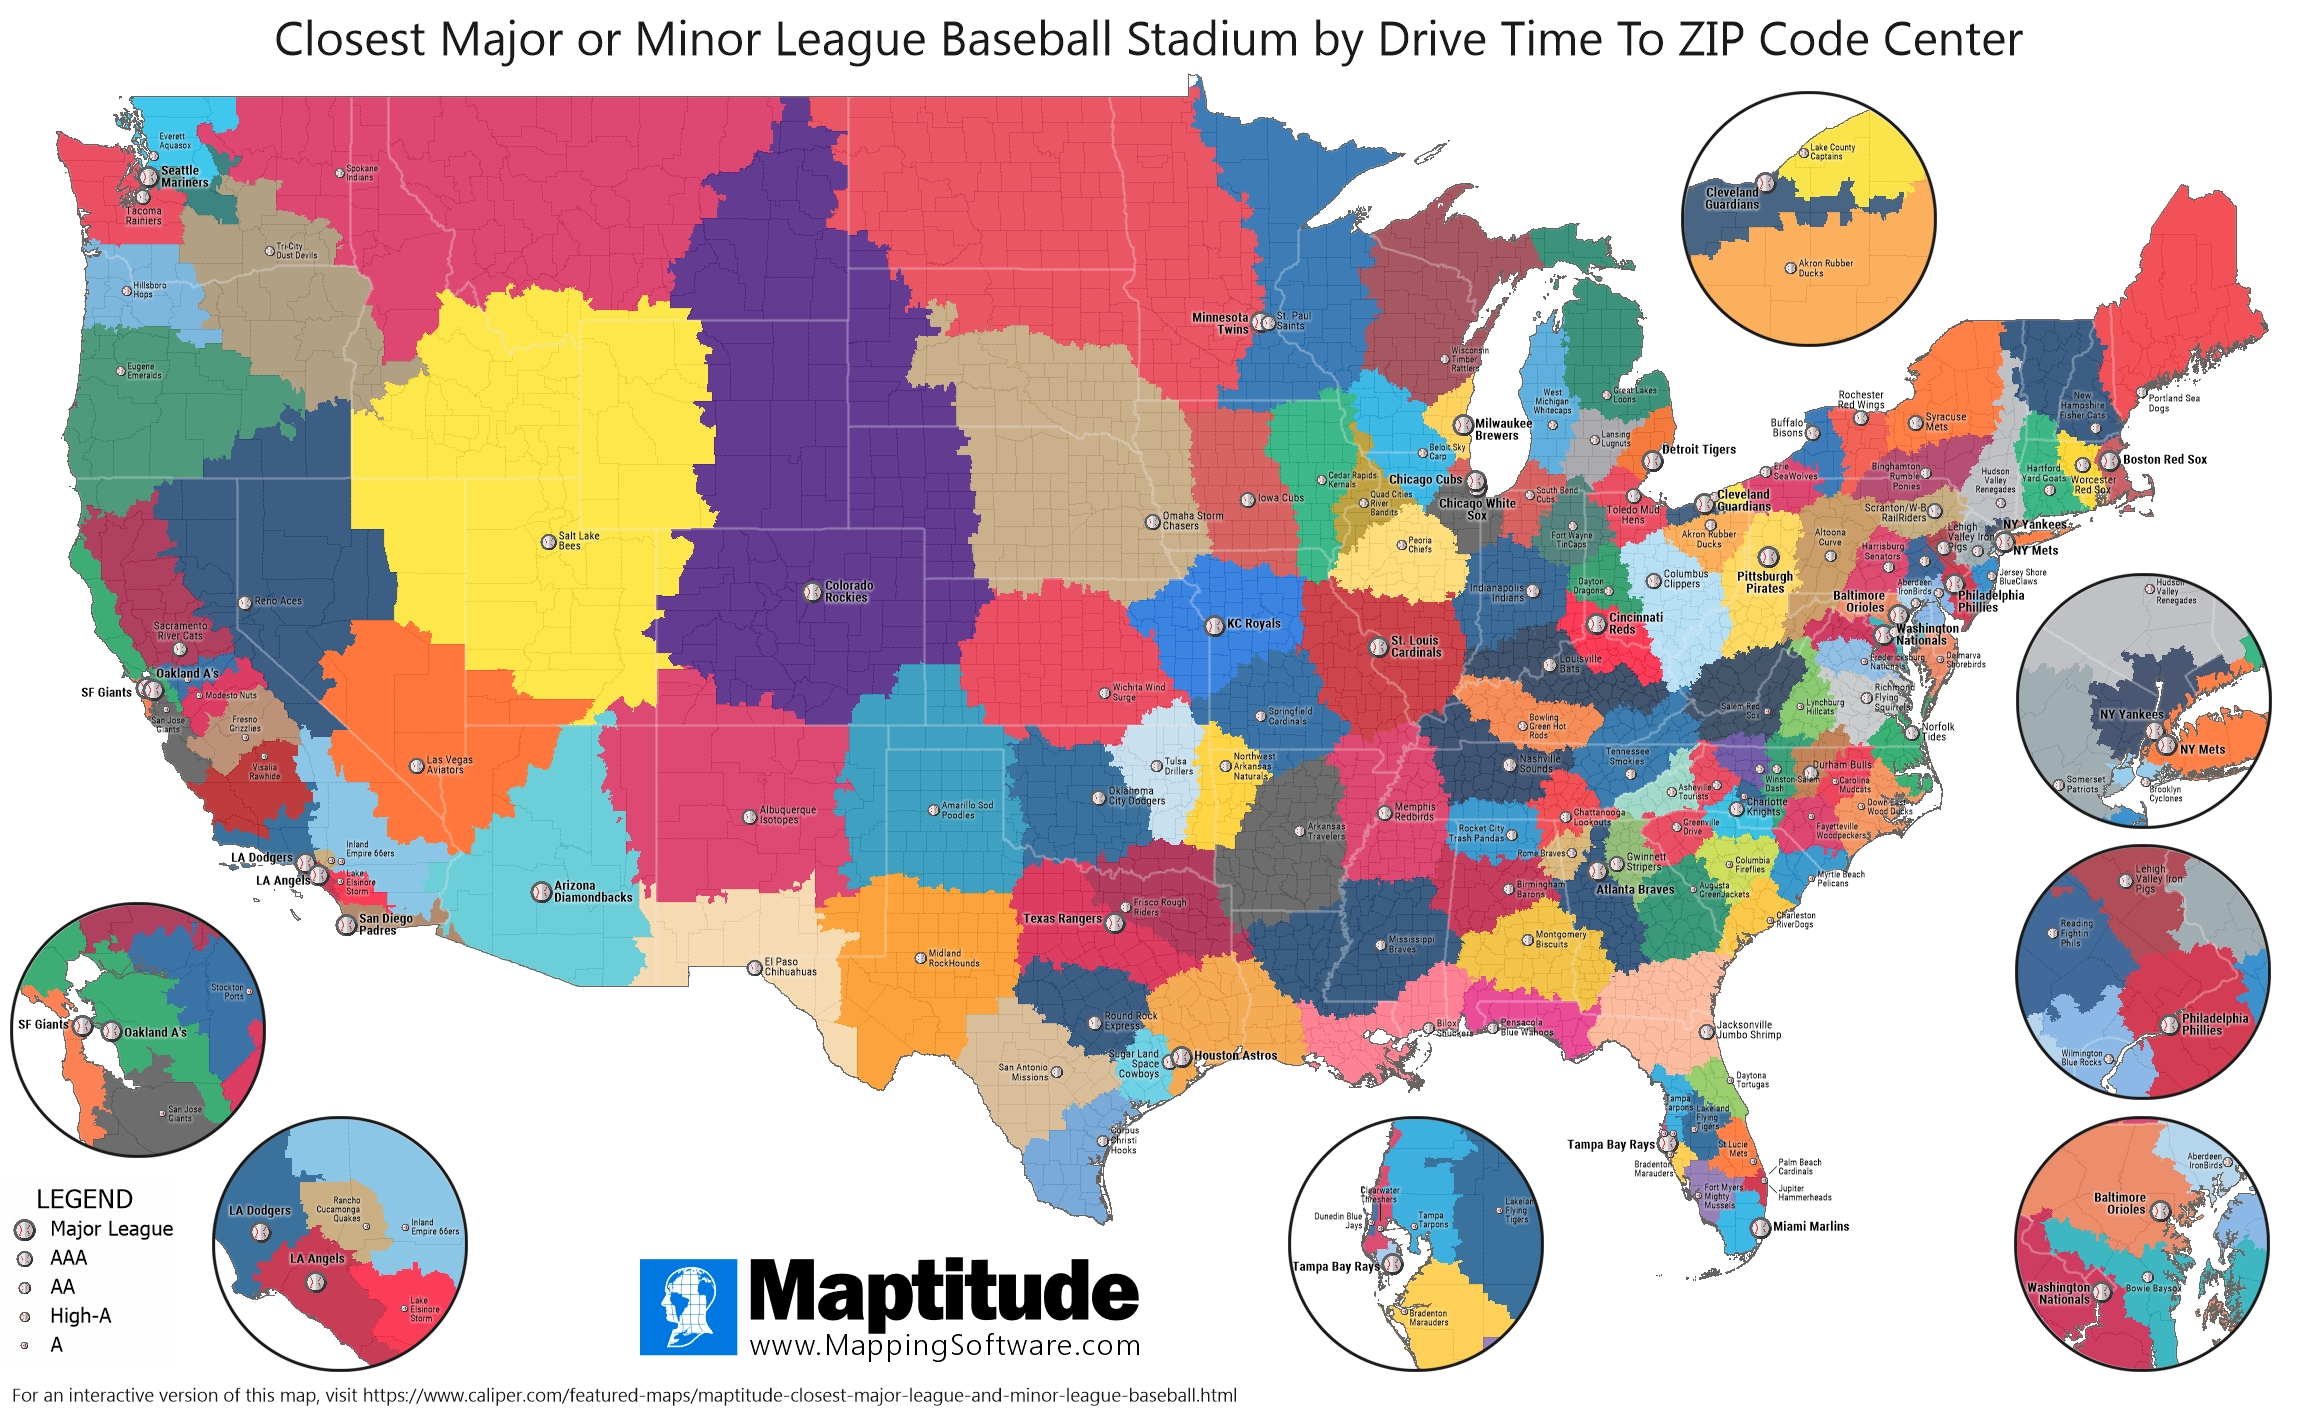 Maptitude map showing the closest baseball park to locations to USA ZIP Codes